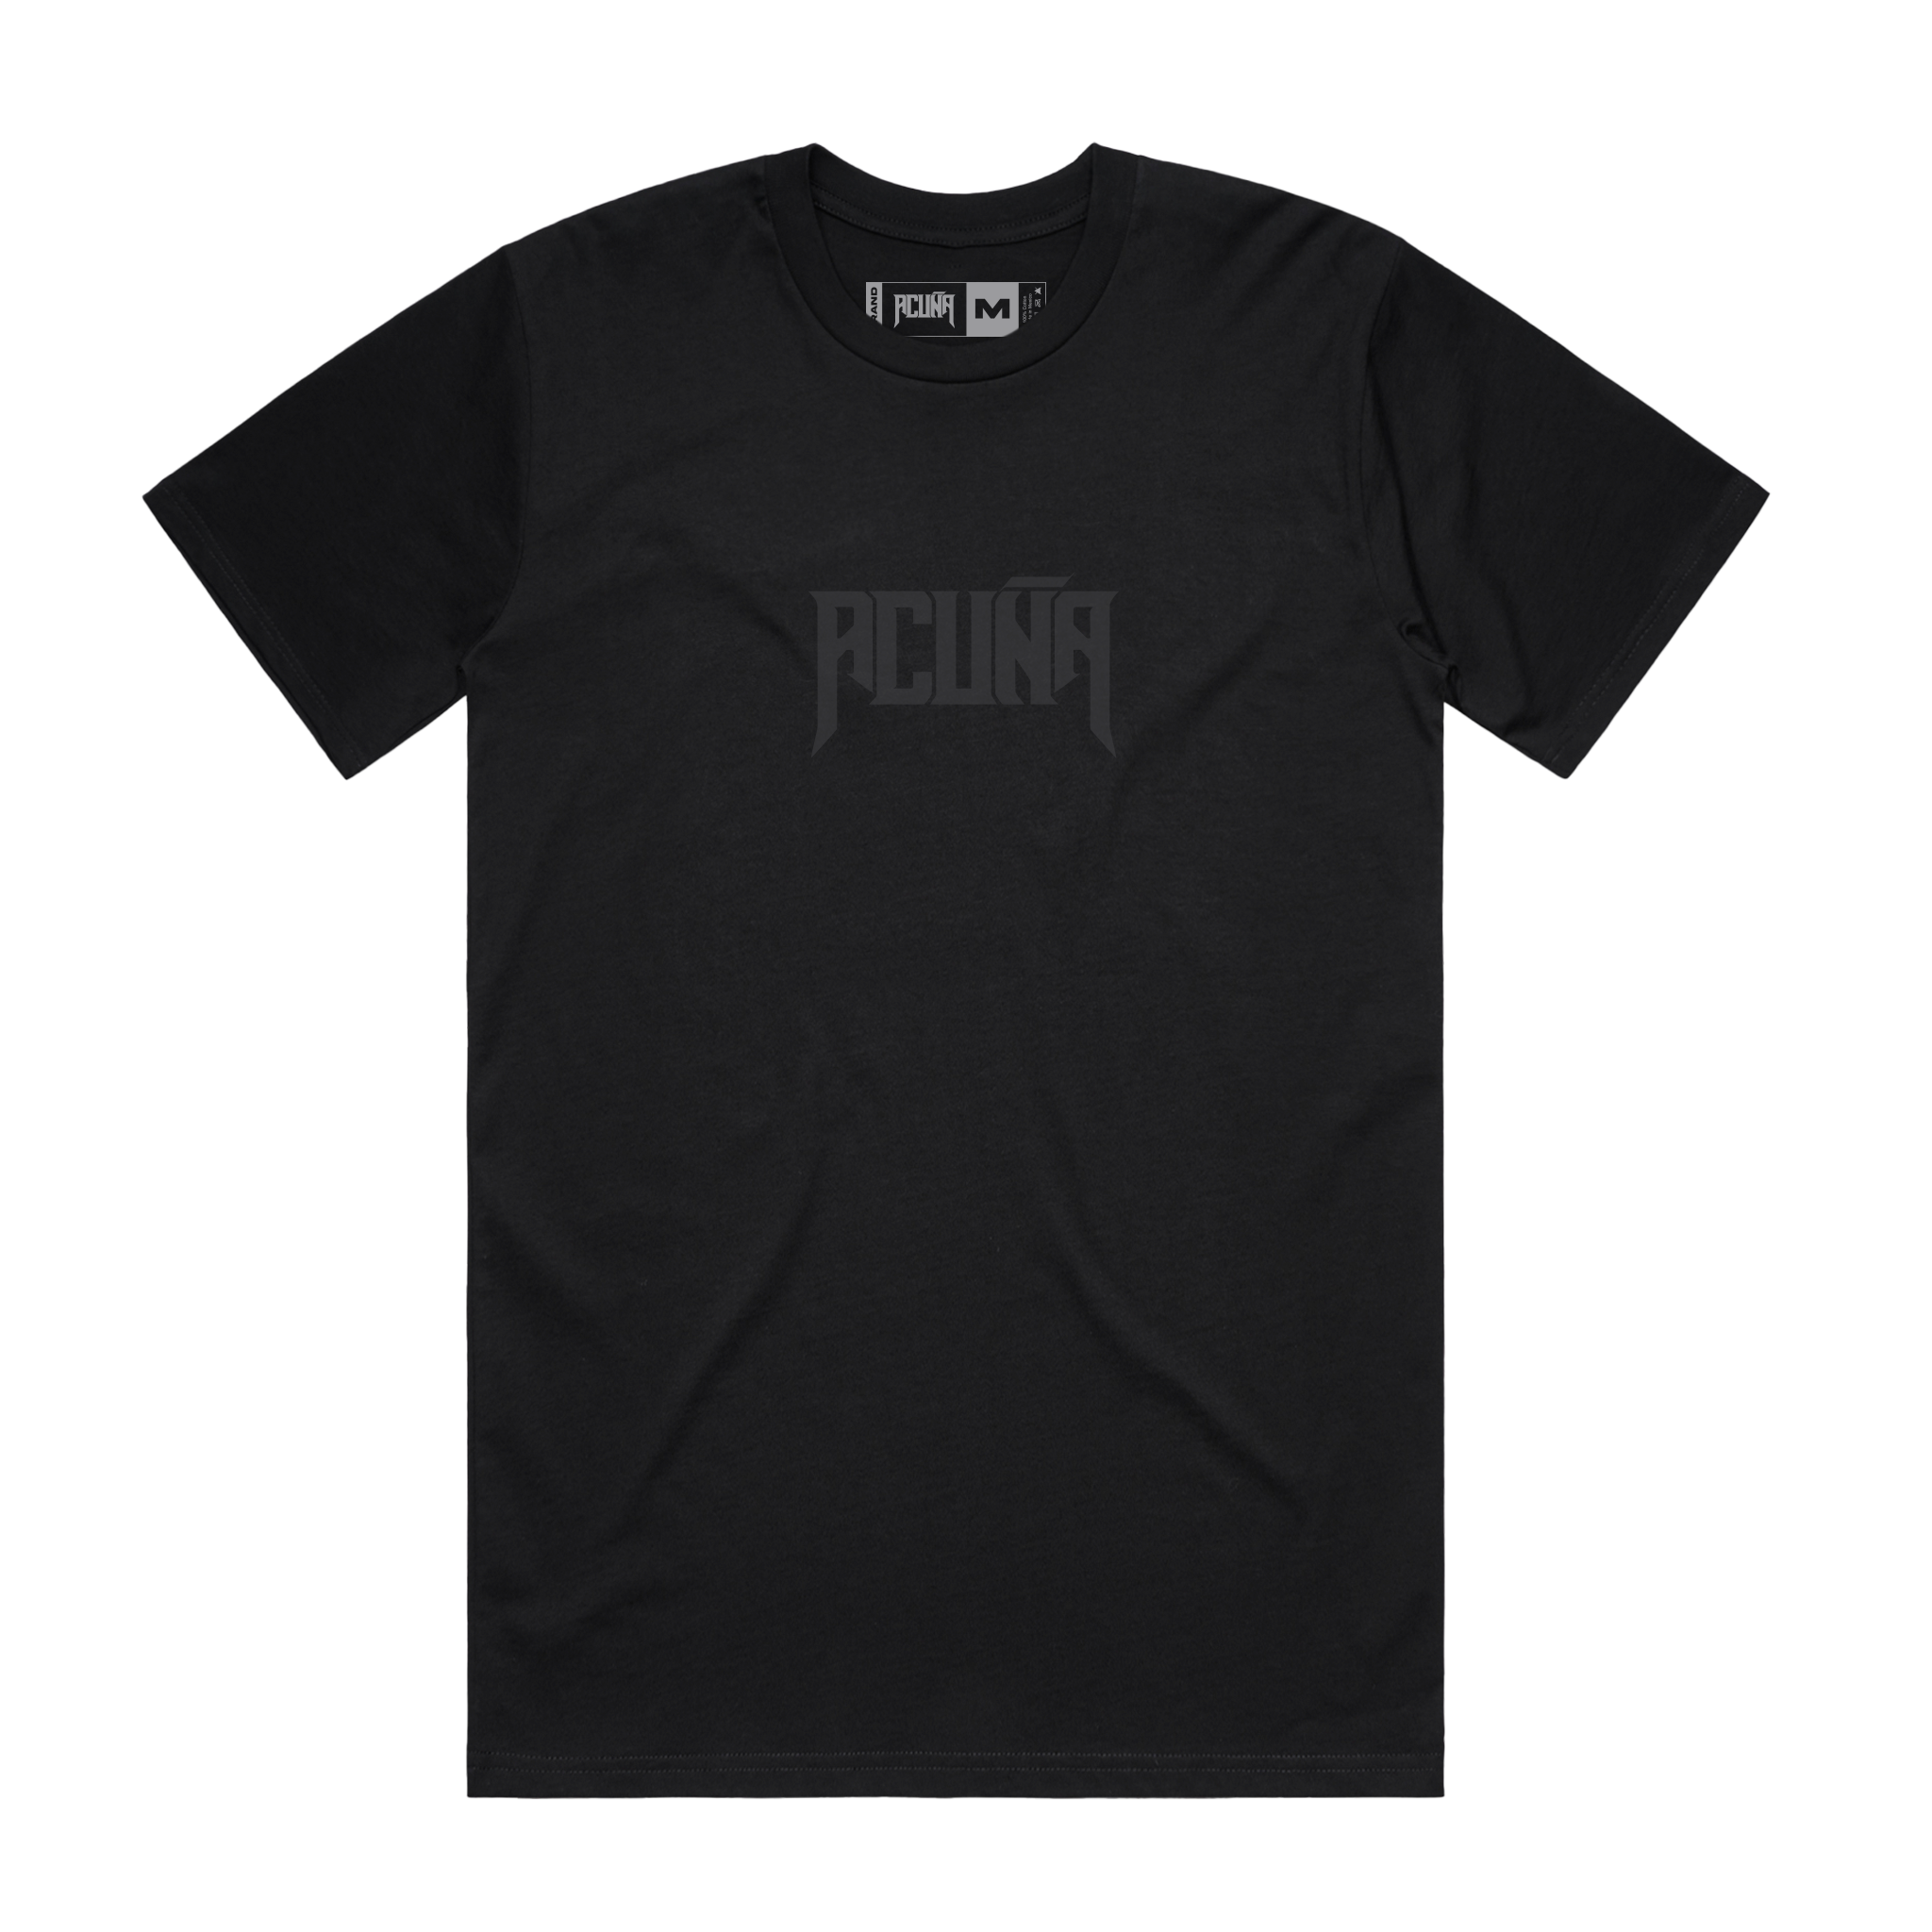 Front image of the Black Crew Neck Tee Shirt with Short Sleeves Featuring "Acuña" printed in black